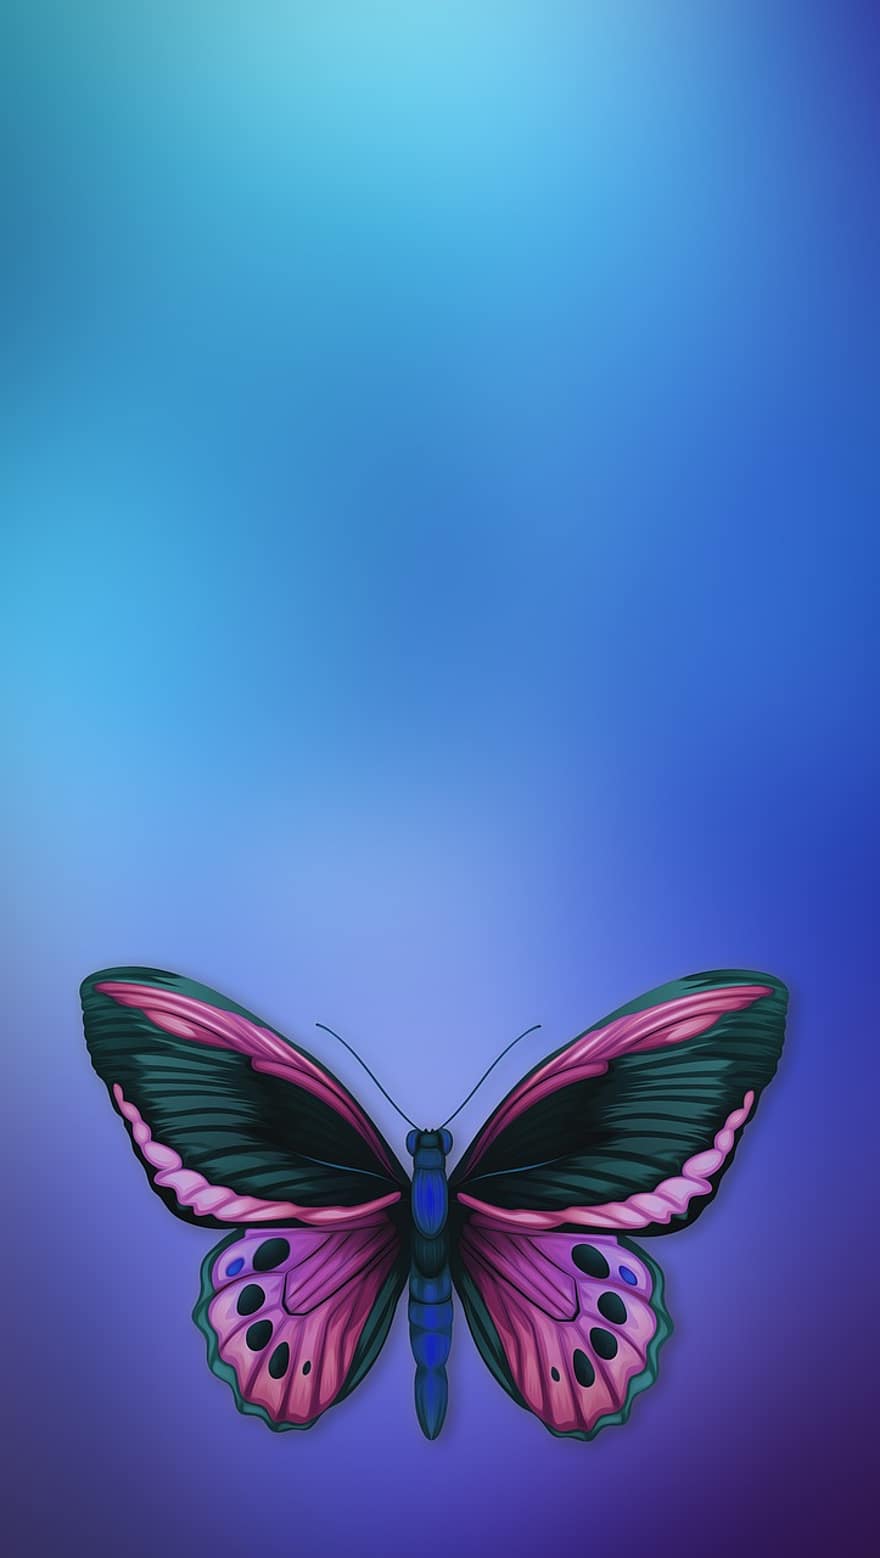 Butterfly, Map, Upright, Vertical, Template, Colorful, Decorative, Blue Butterfly